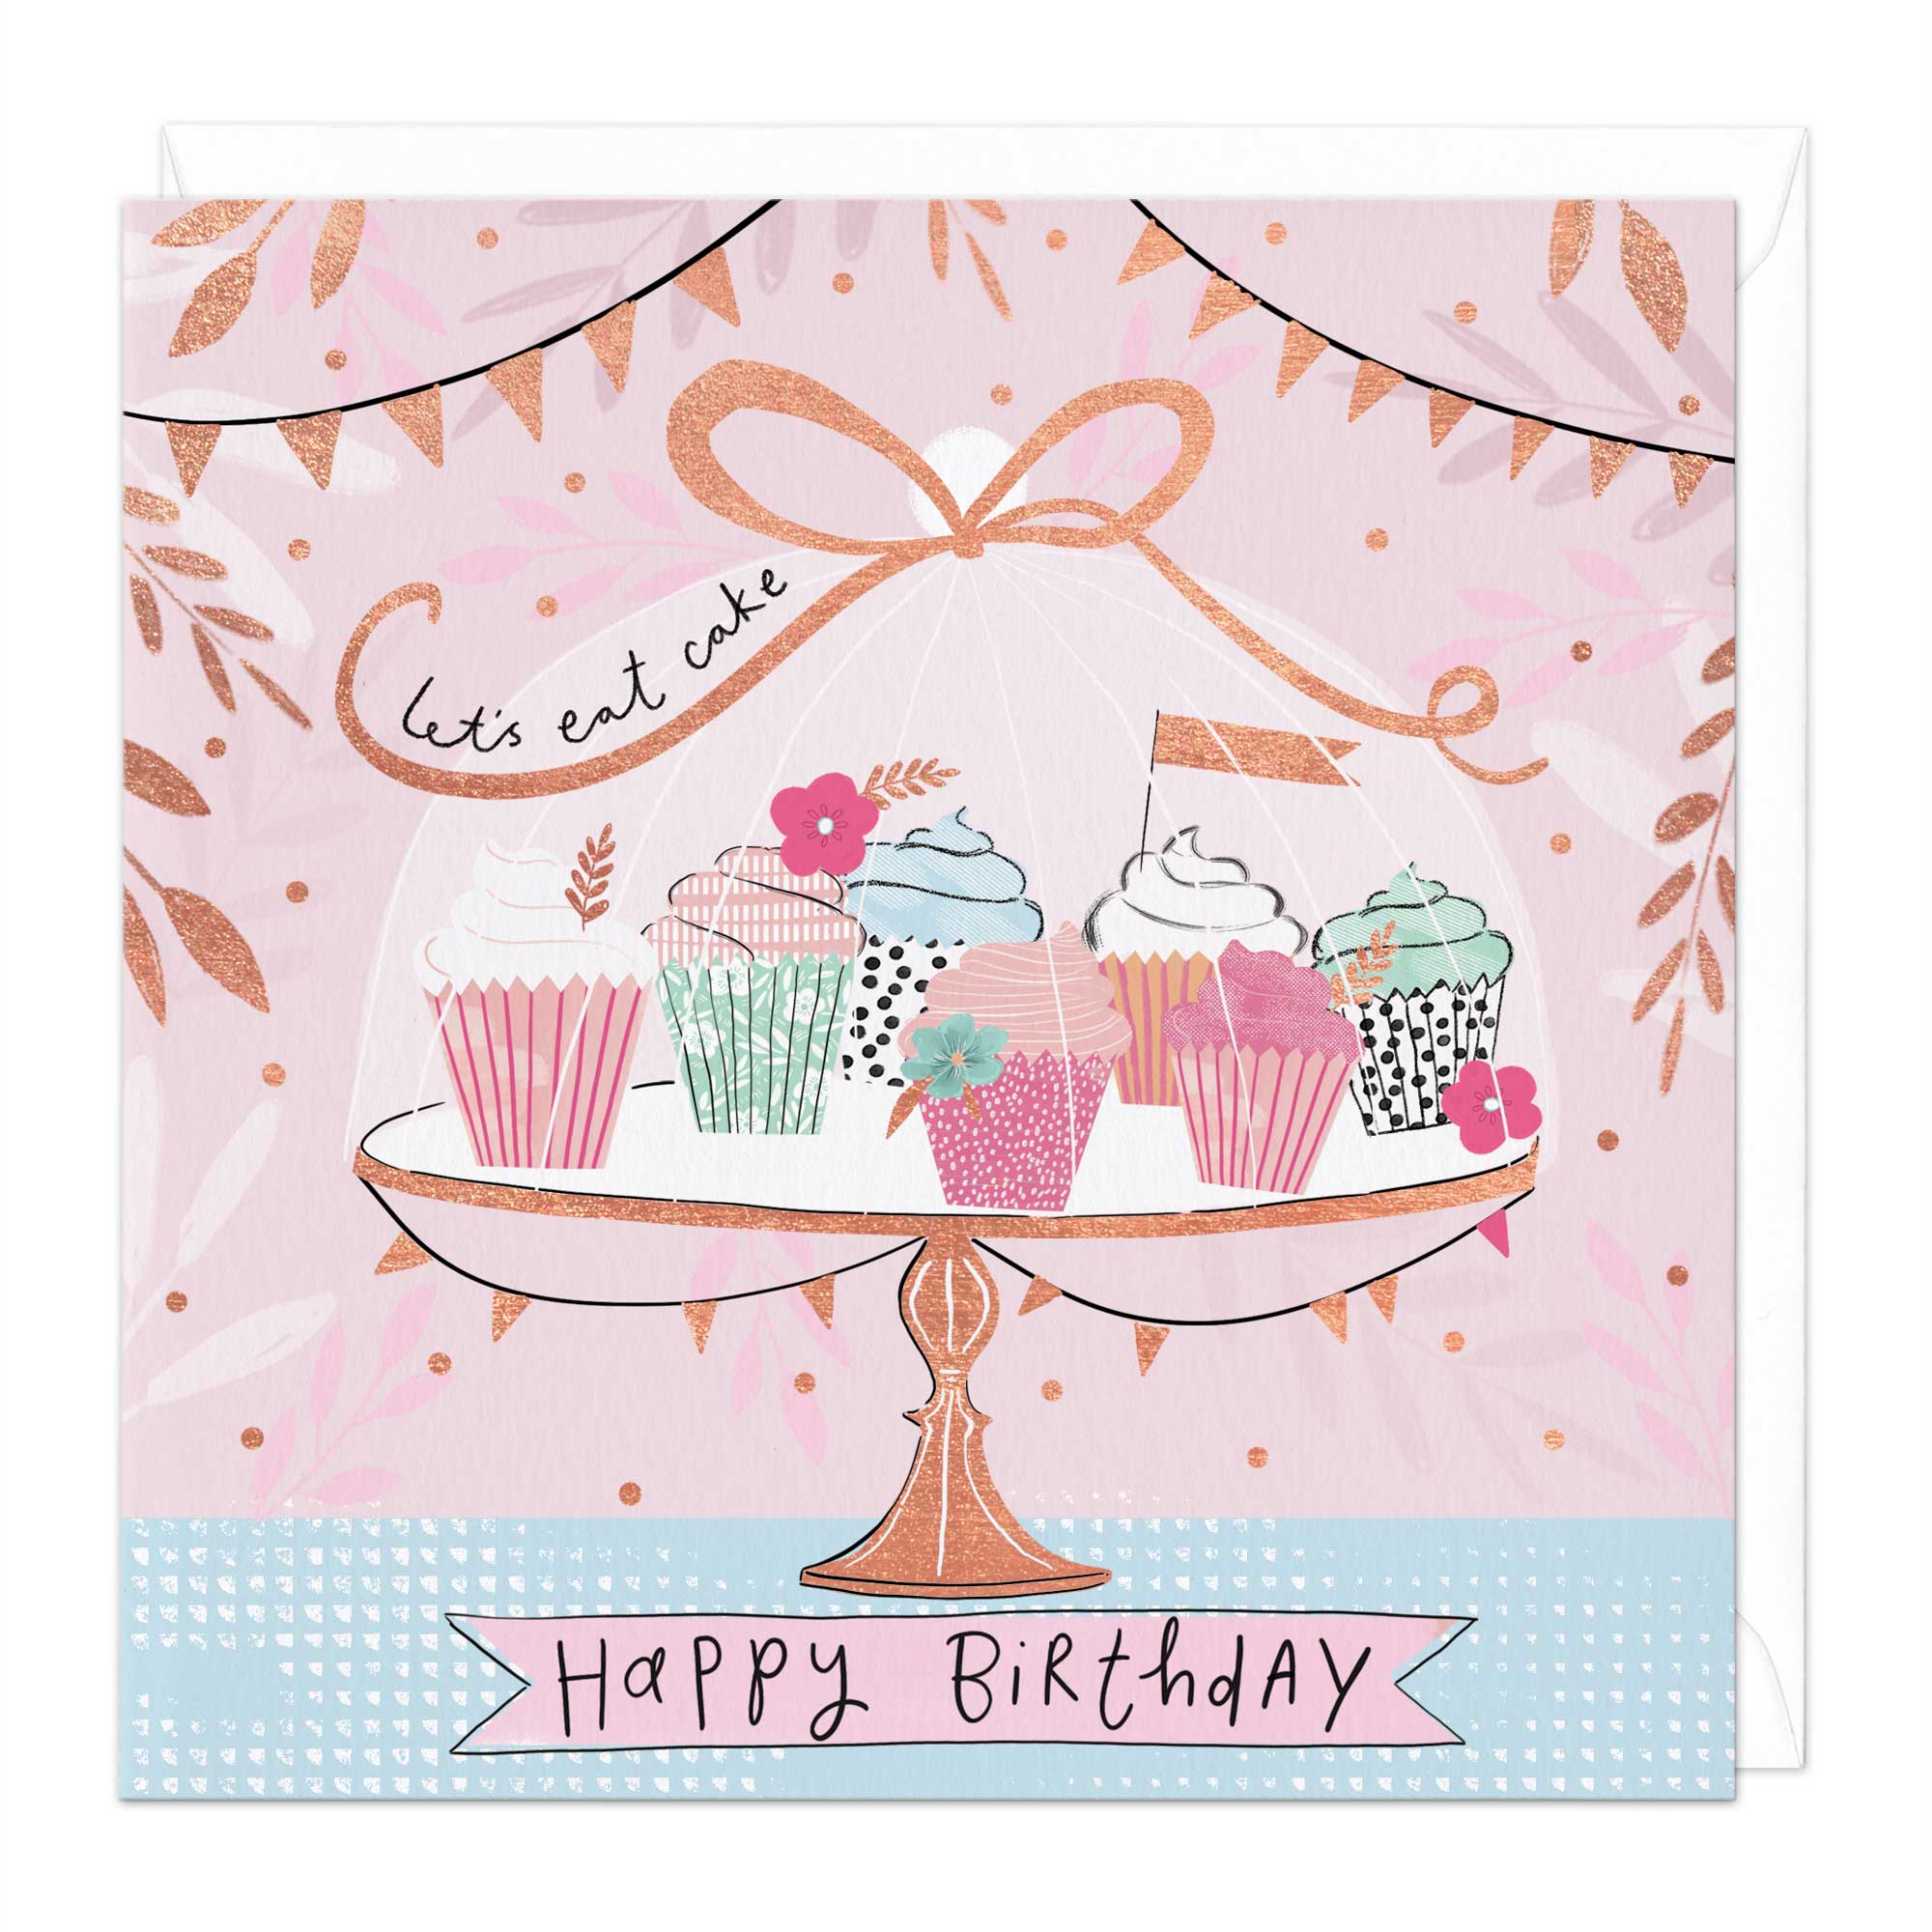 Lets Eat Cake Birthday Card